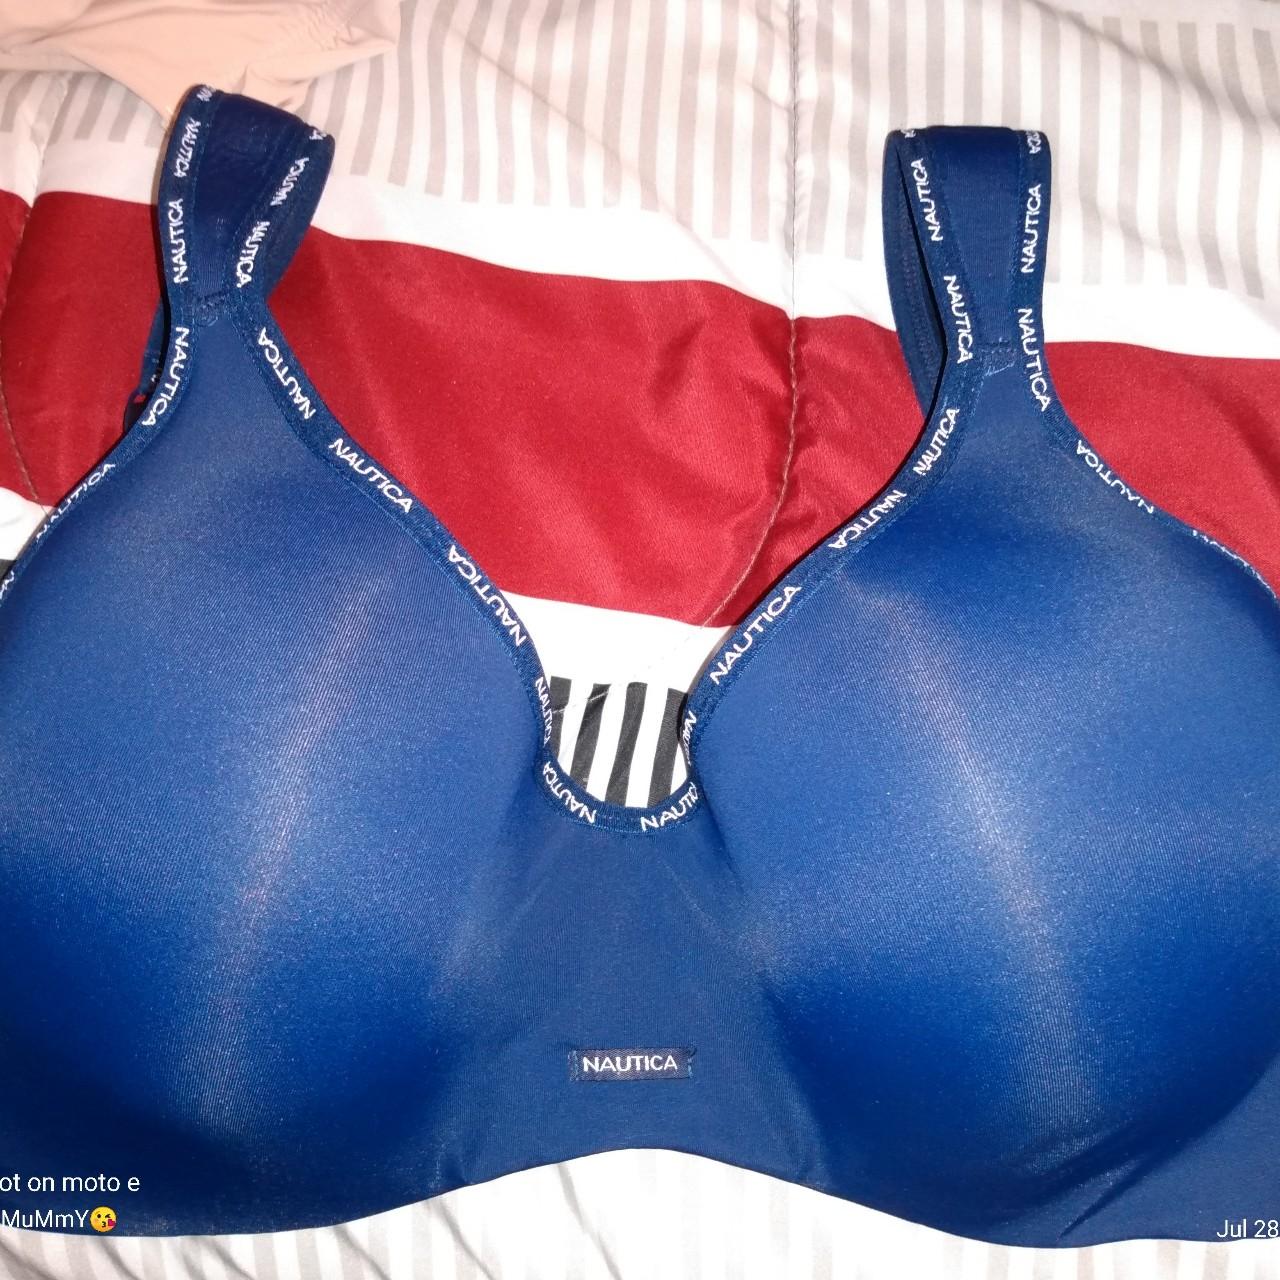 I have 2 Nautica full support bras. Can wear to work